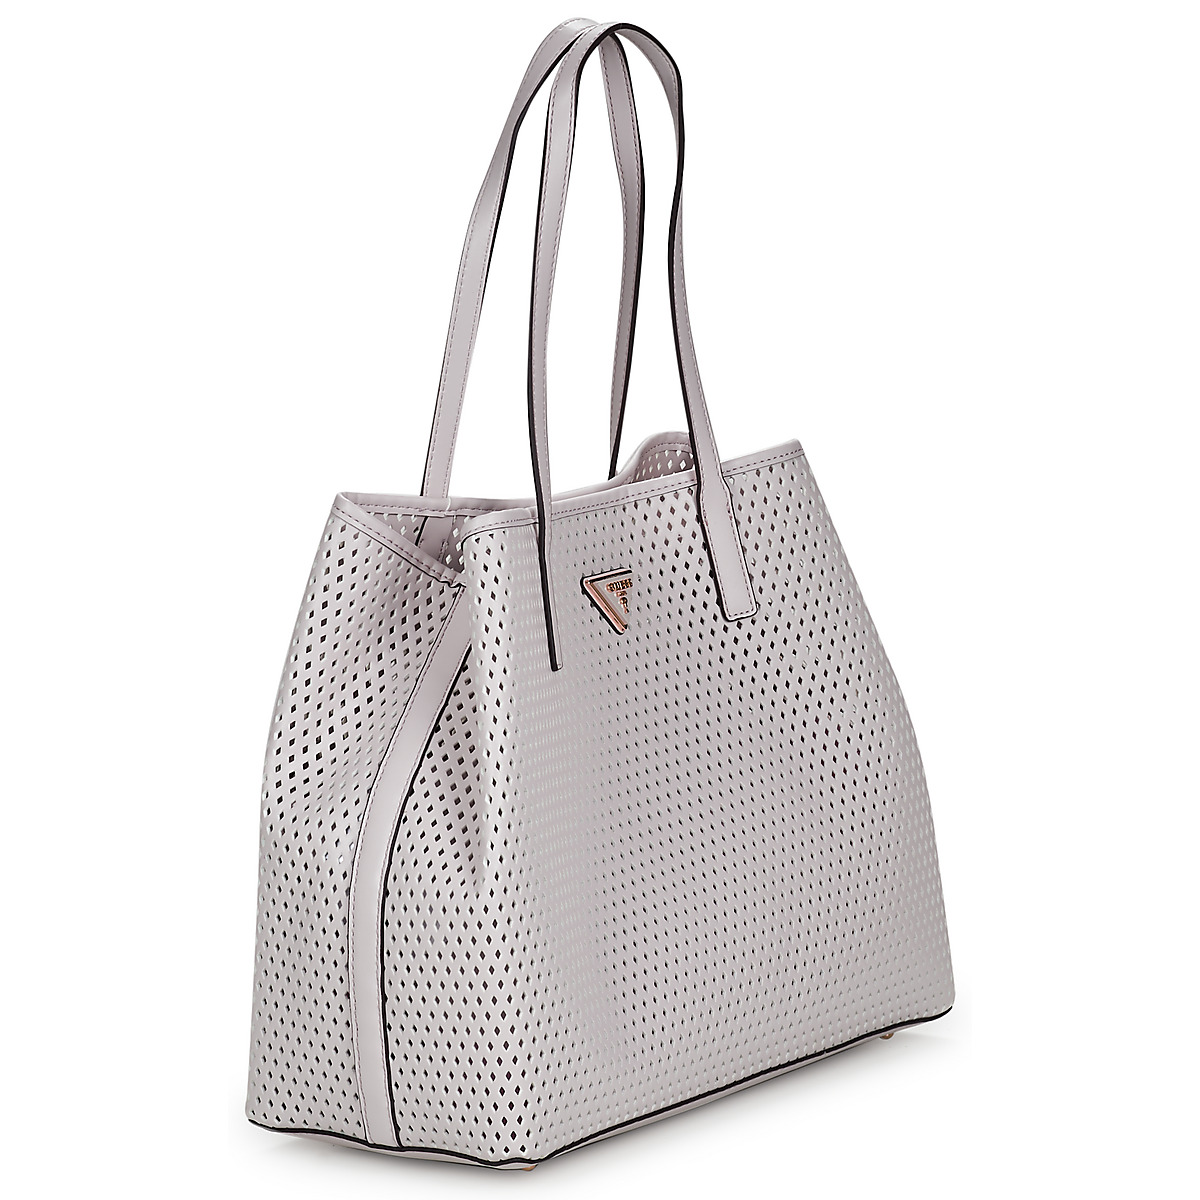 Guess Beige LARGE TOTE VIKKY iR0vGHSz